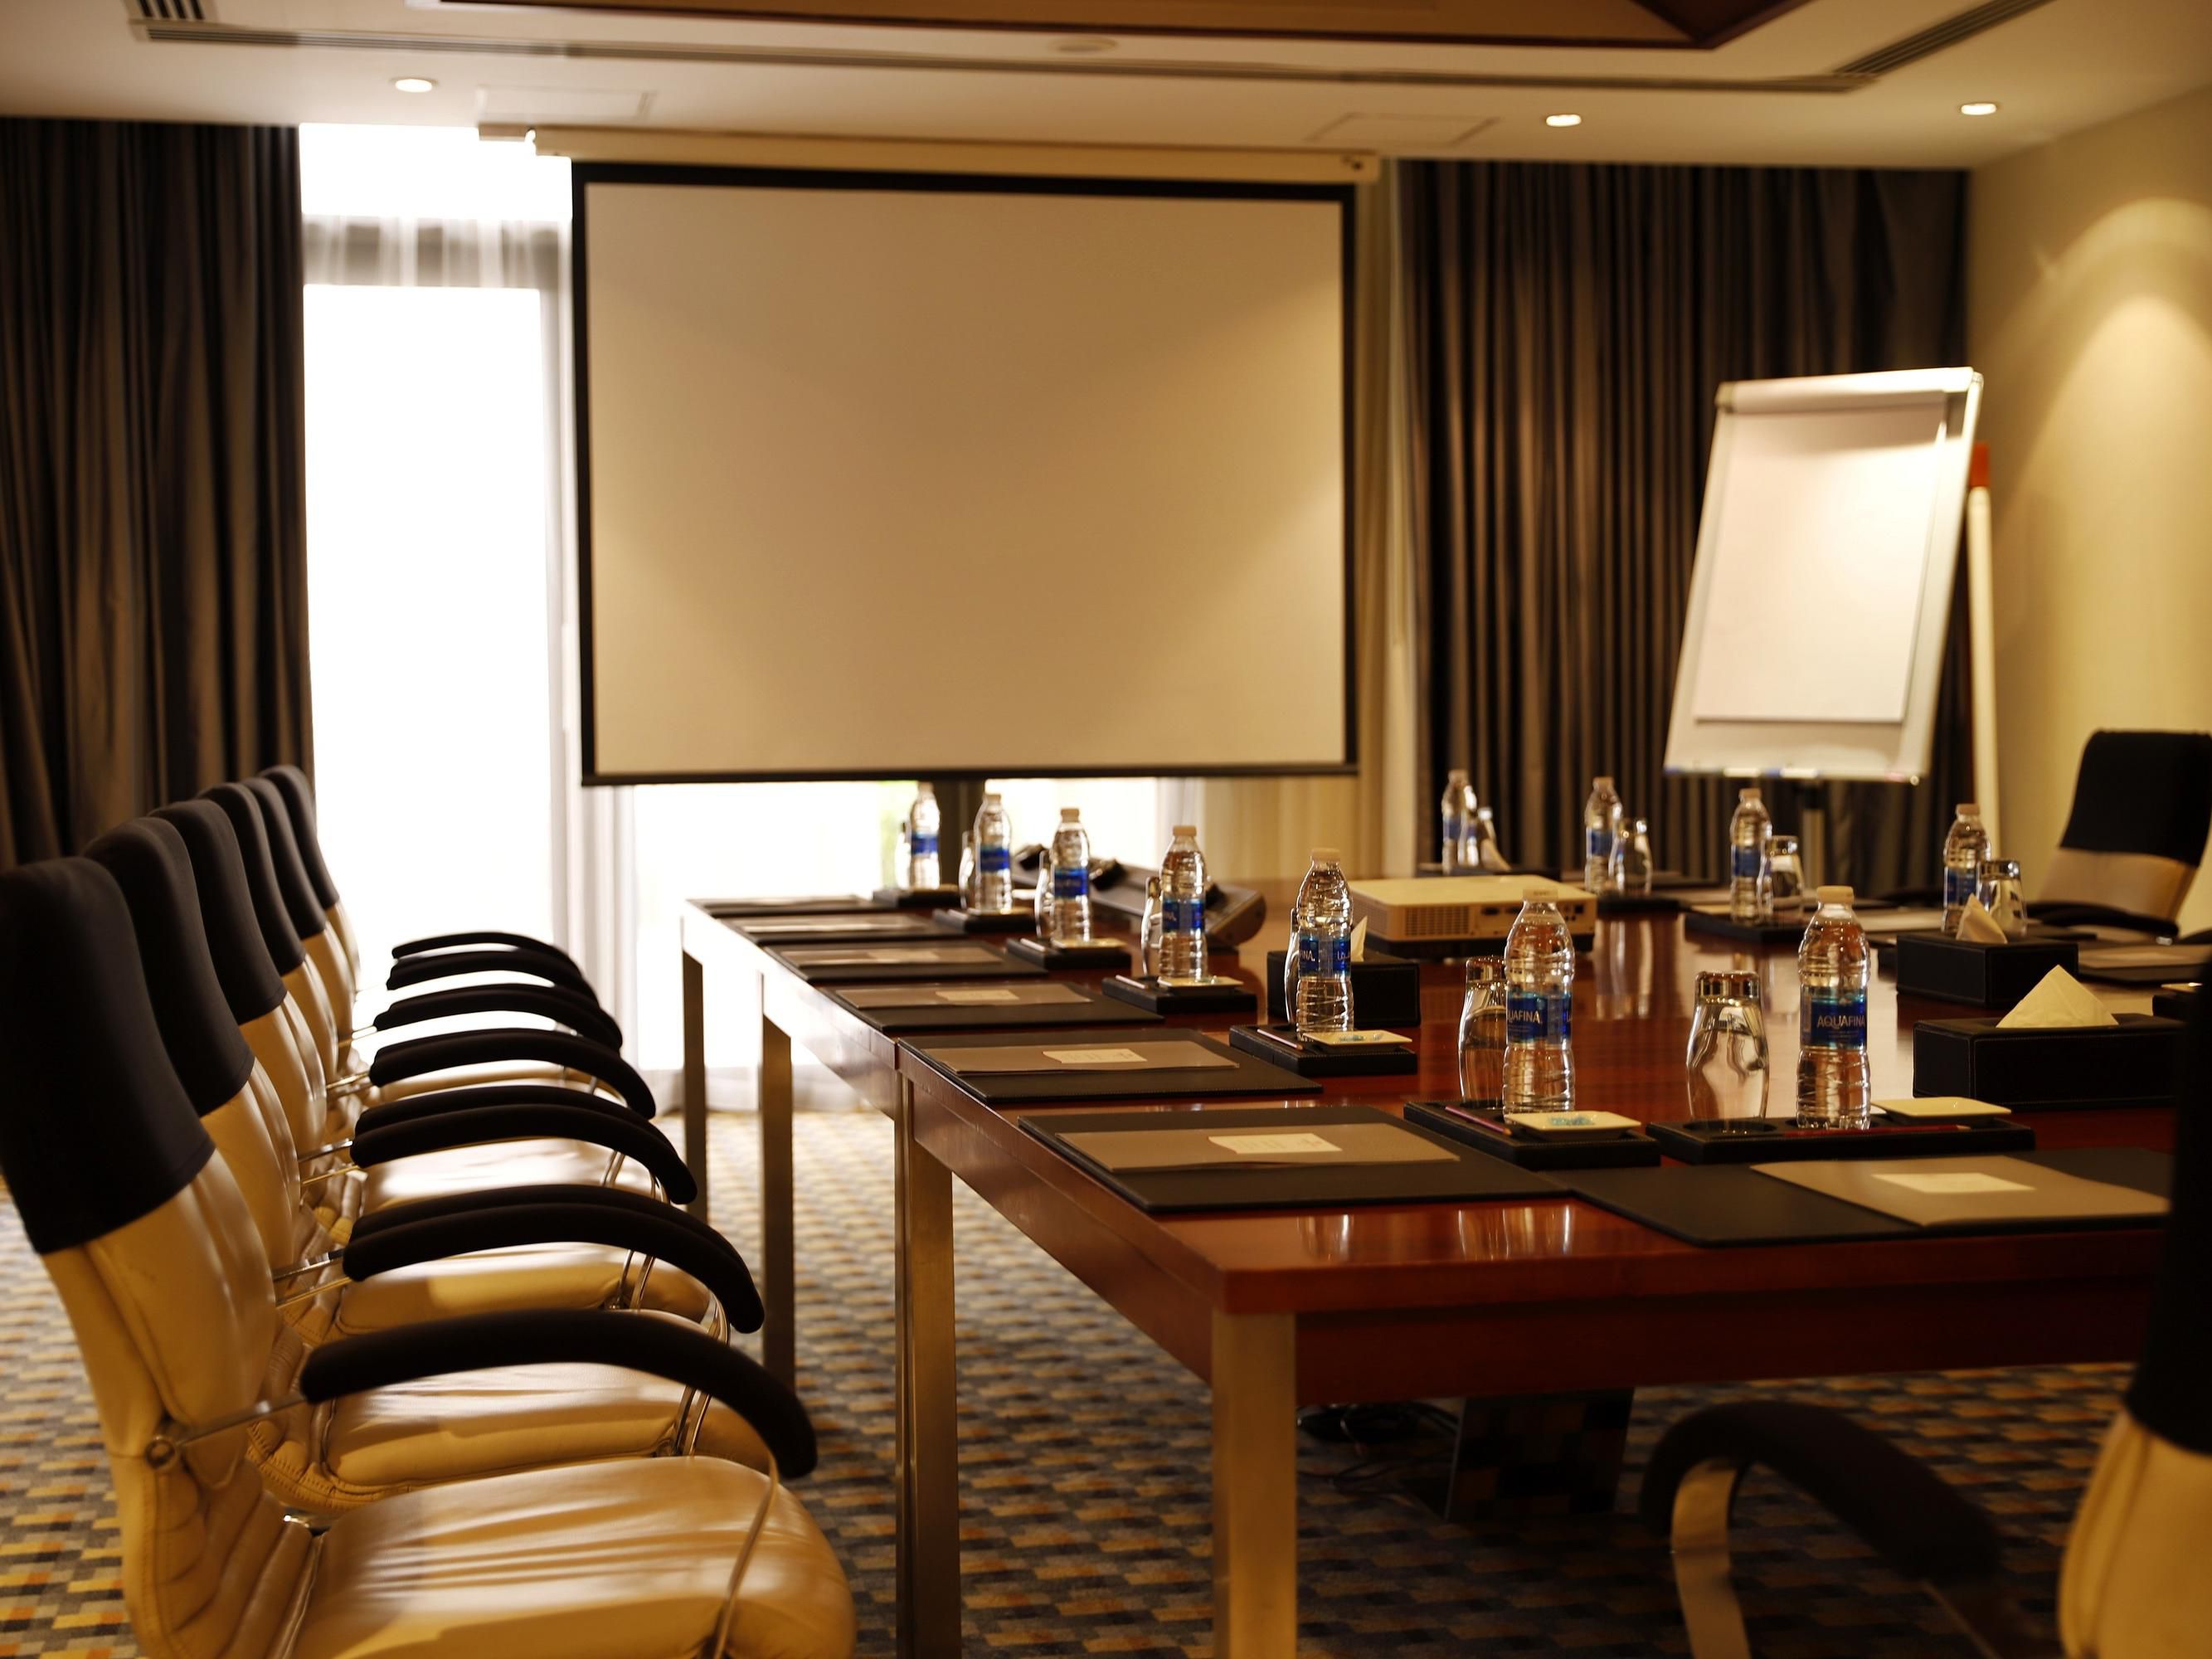 Contact our Crowne Plaza Meeting Director to offer you the right meeting space for your event (wedding, training, product launch etc.).